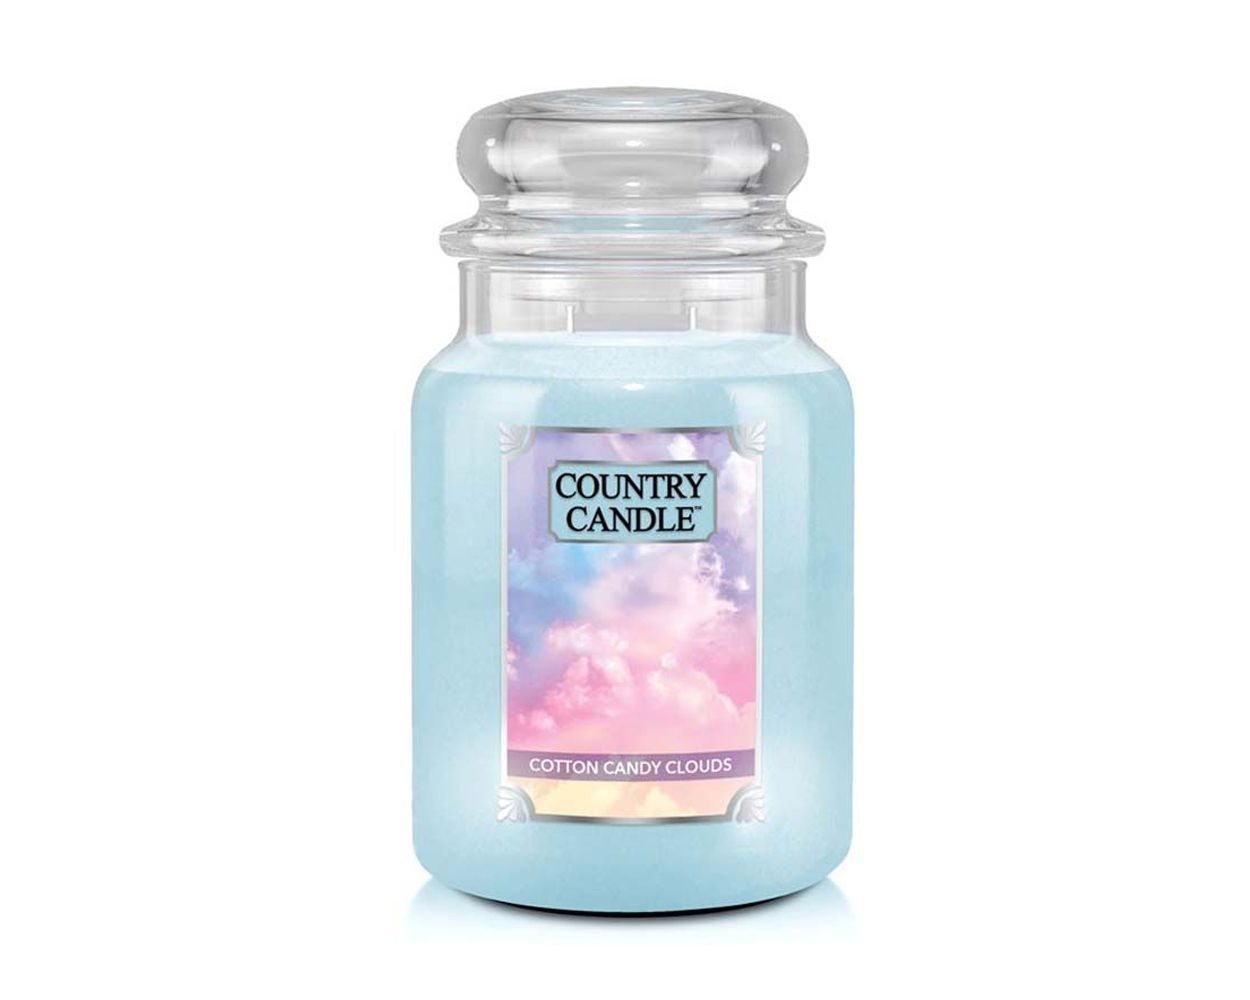 Cotton Candy Sky Candle - Ginger Cotton Candy Scented Soy – Dio